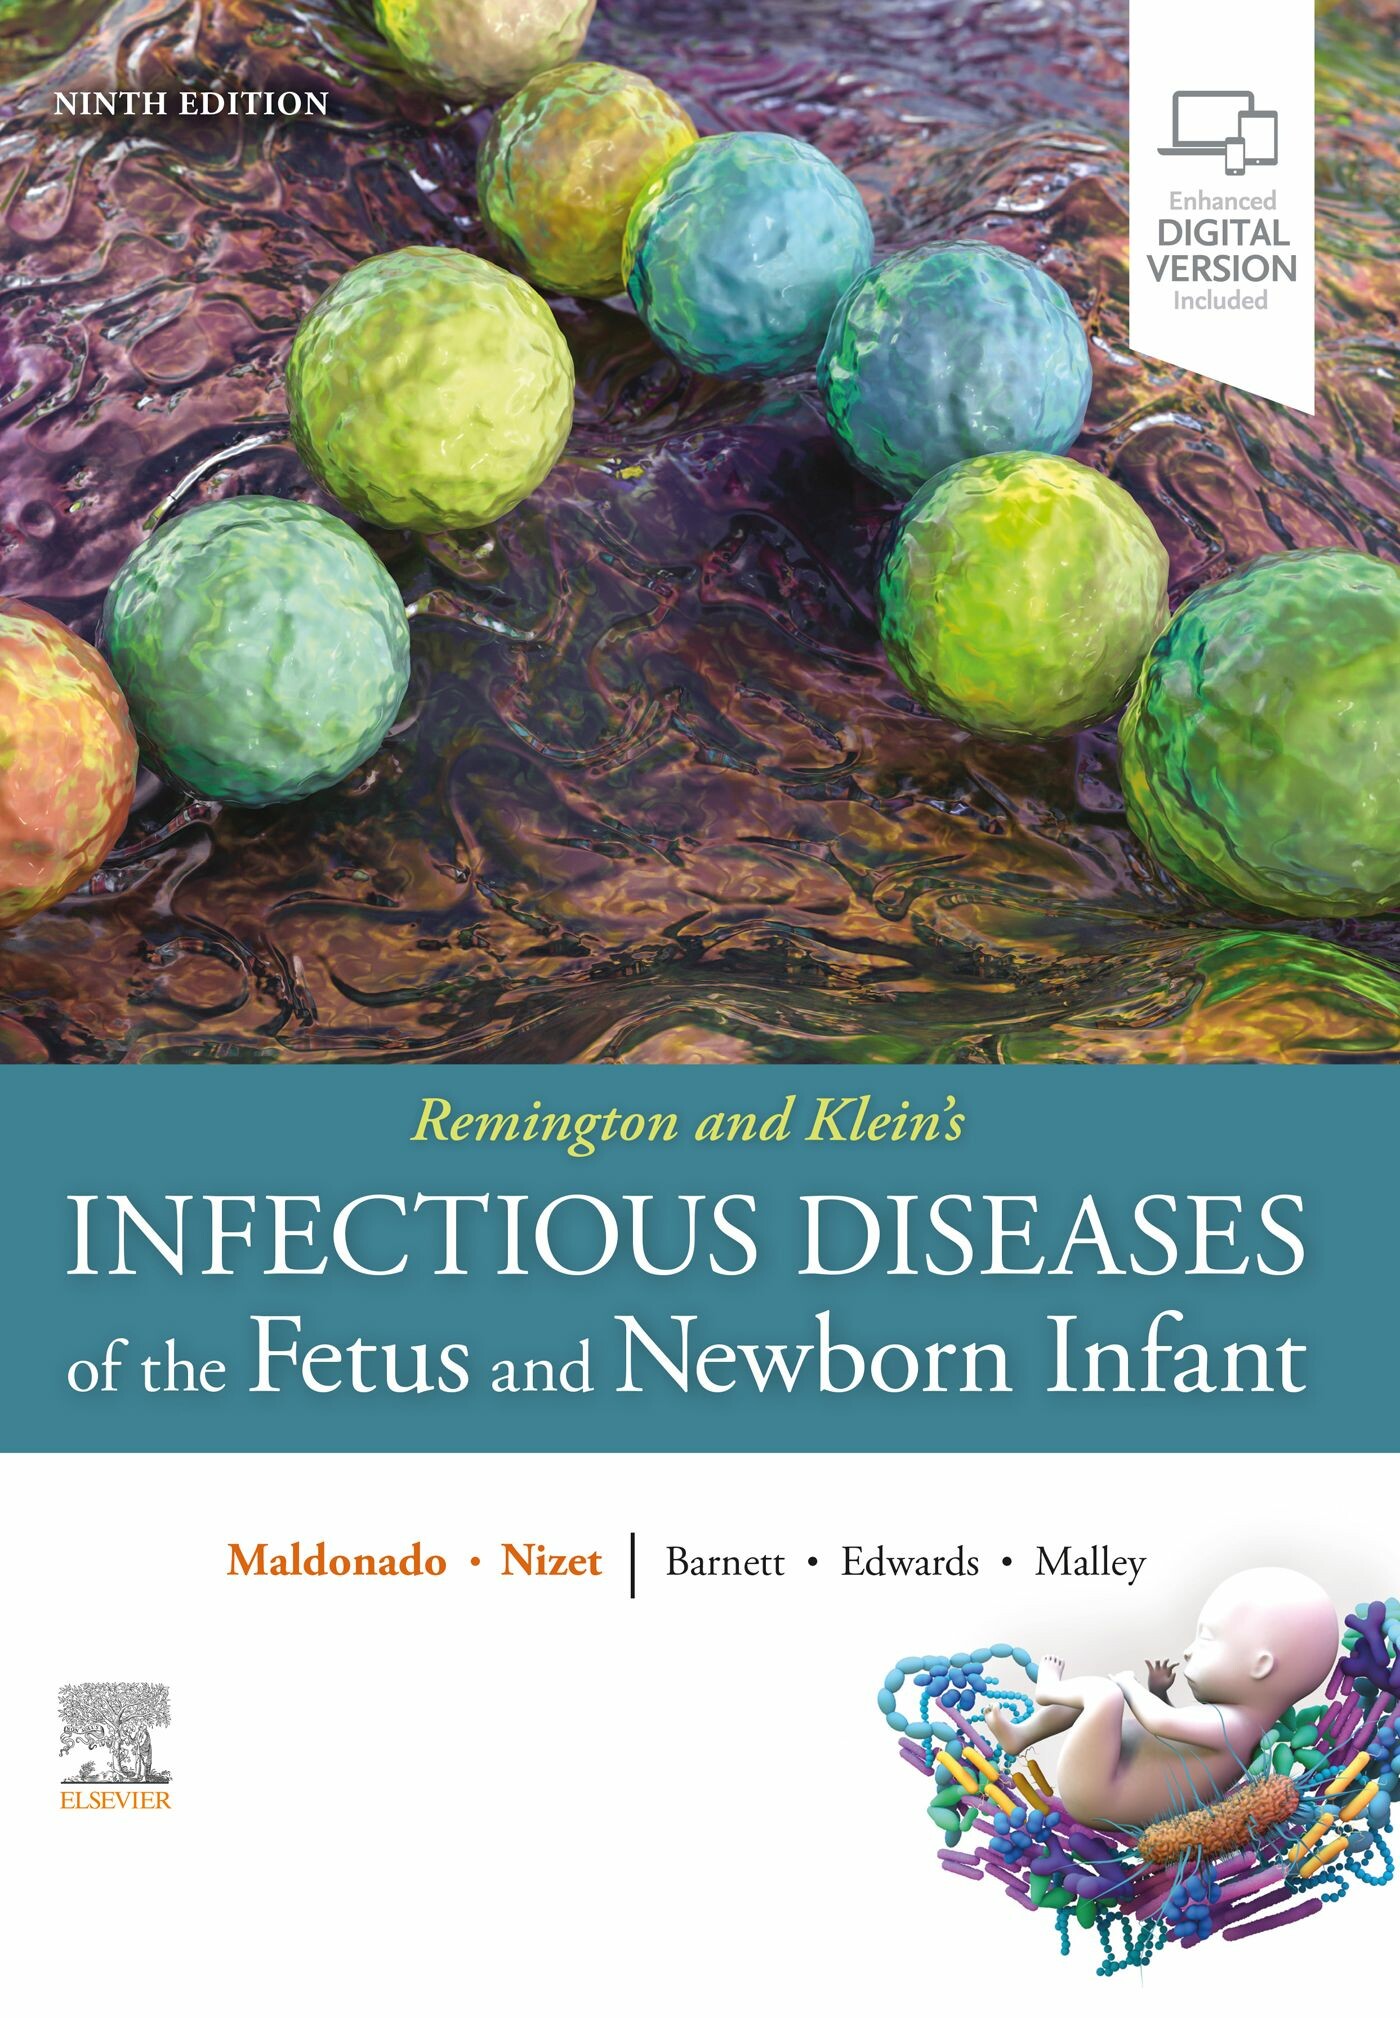 Remington and Klein's Infectious Diseases of the Fetus and Newborn Infant,E-Book